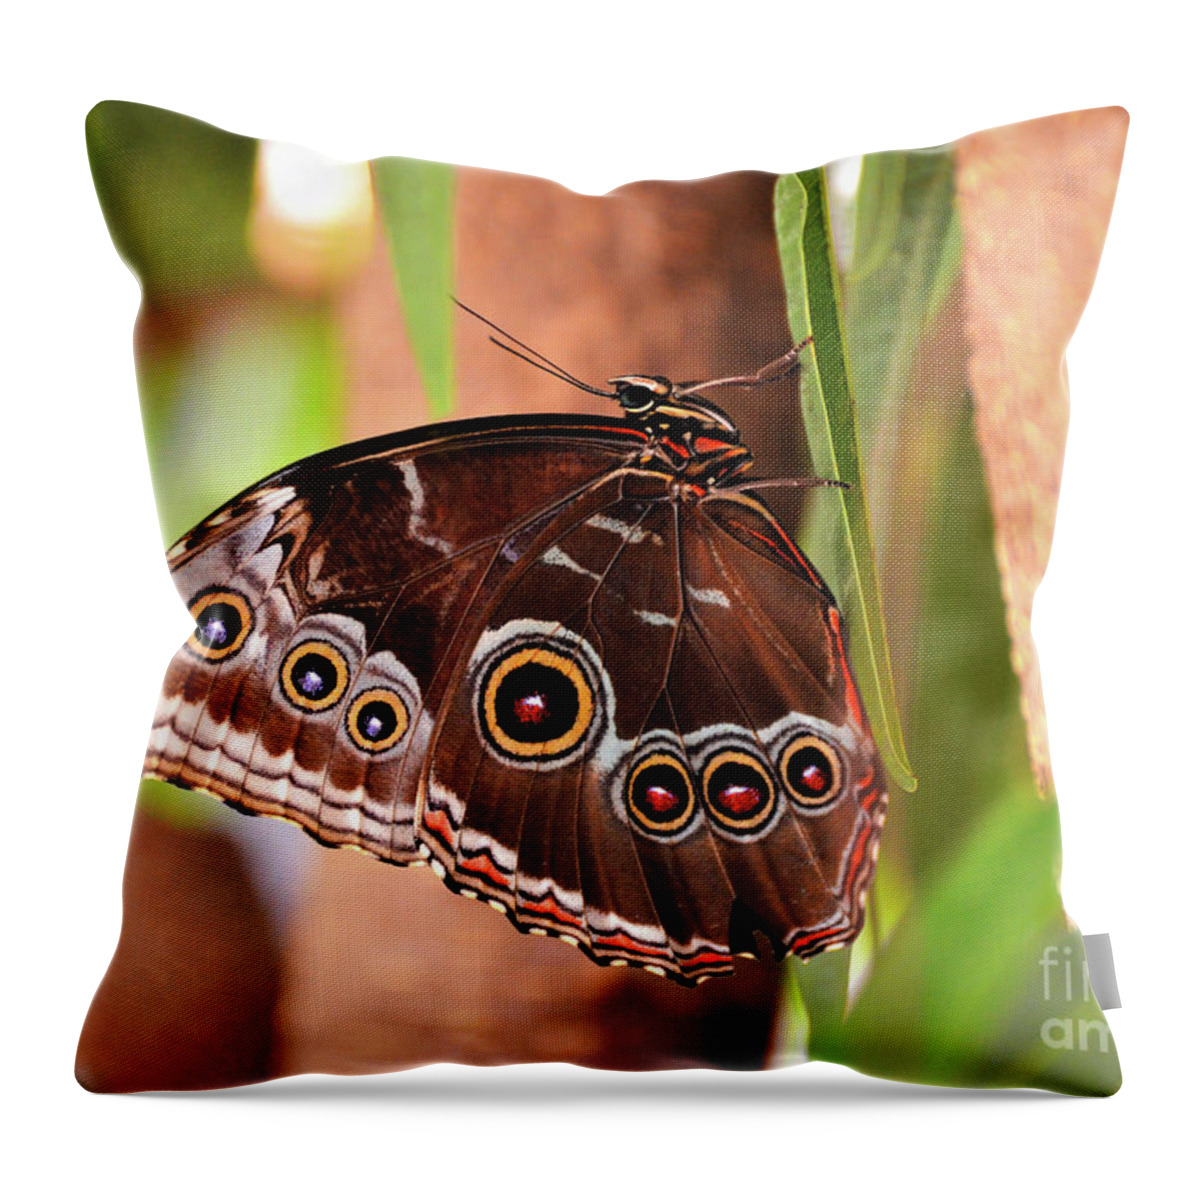 Owl Butterfly Throw Pillow featuring the photograph Owl Butterfly by Kathy Kelly